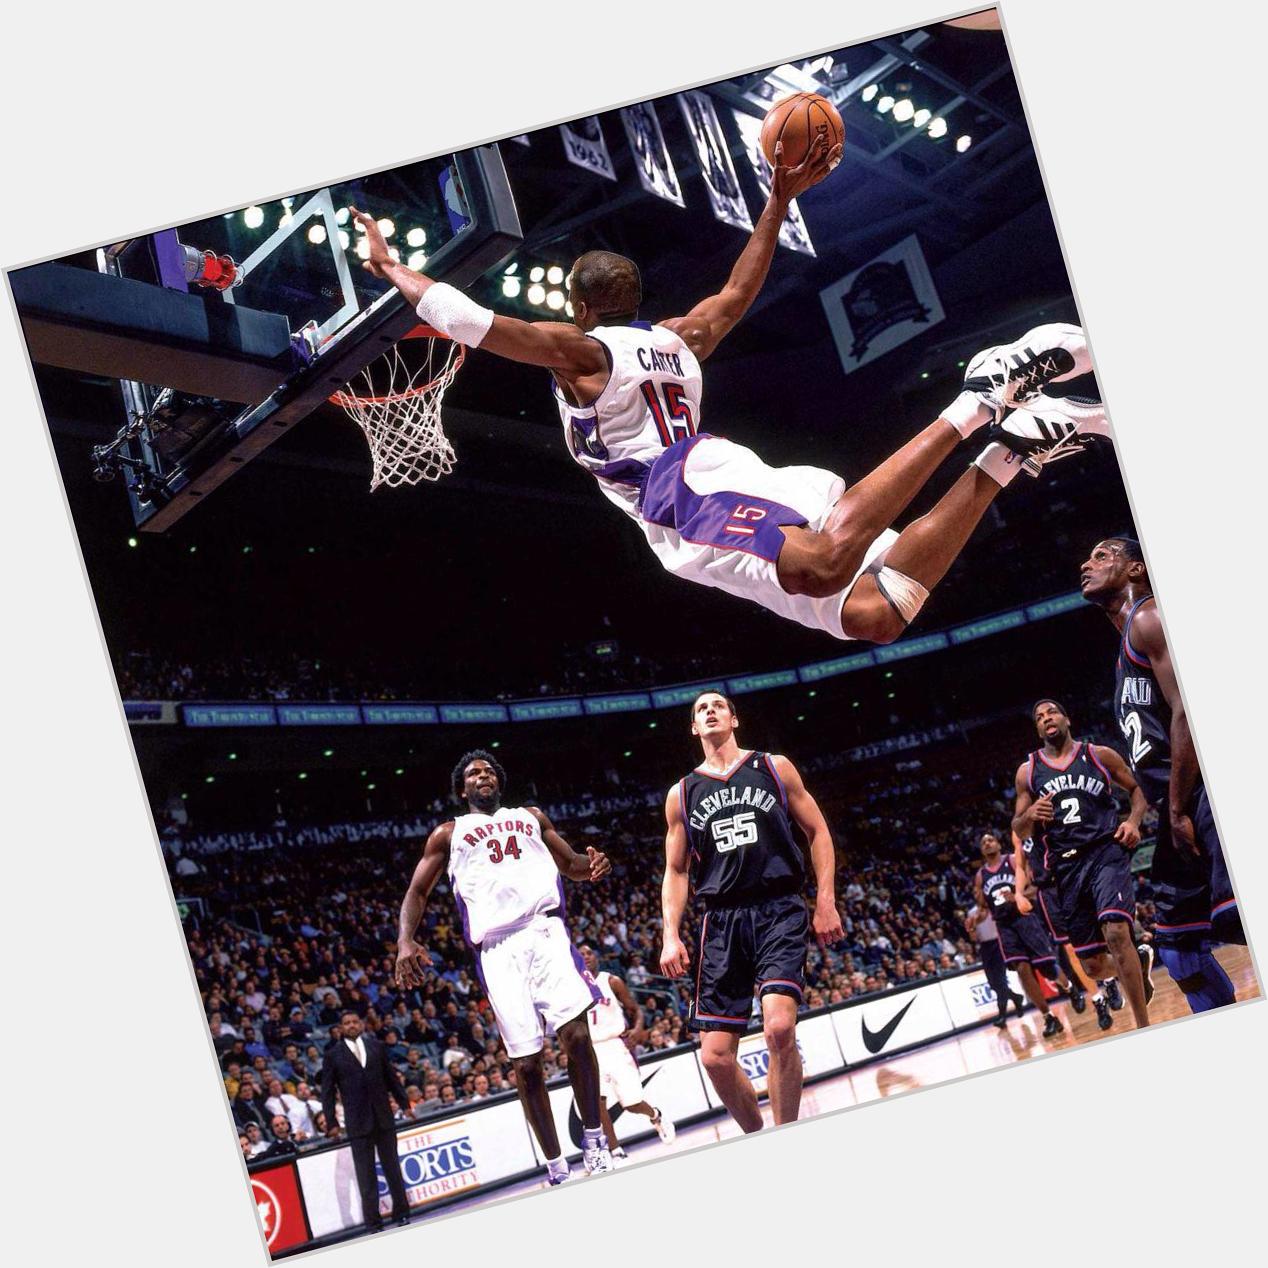 Happy Birthday 38th to Vince Carter, one of the best if not THE best dunker ever to play the game 